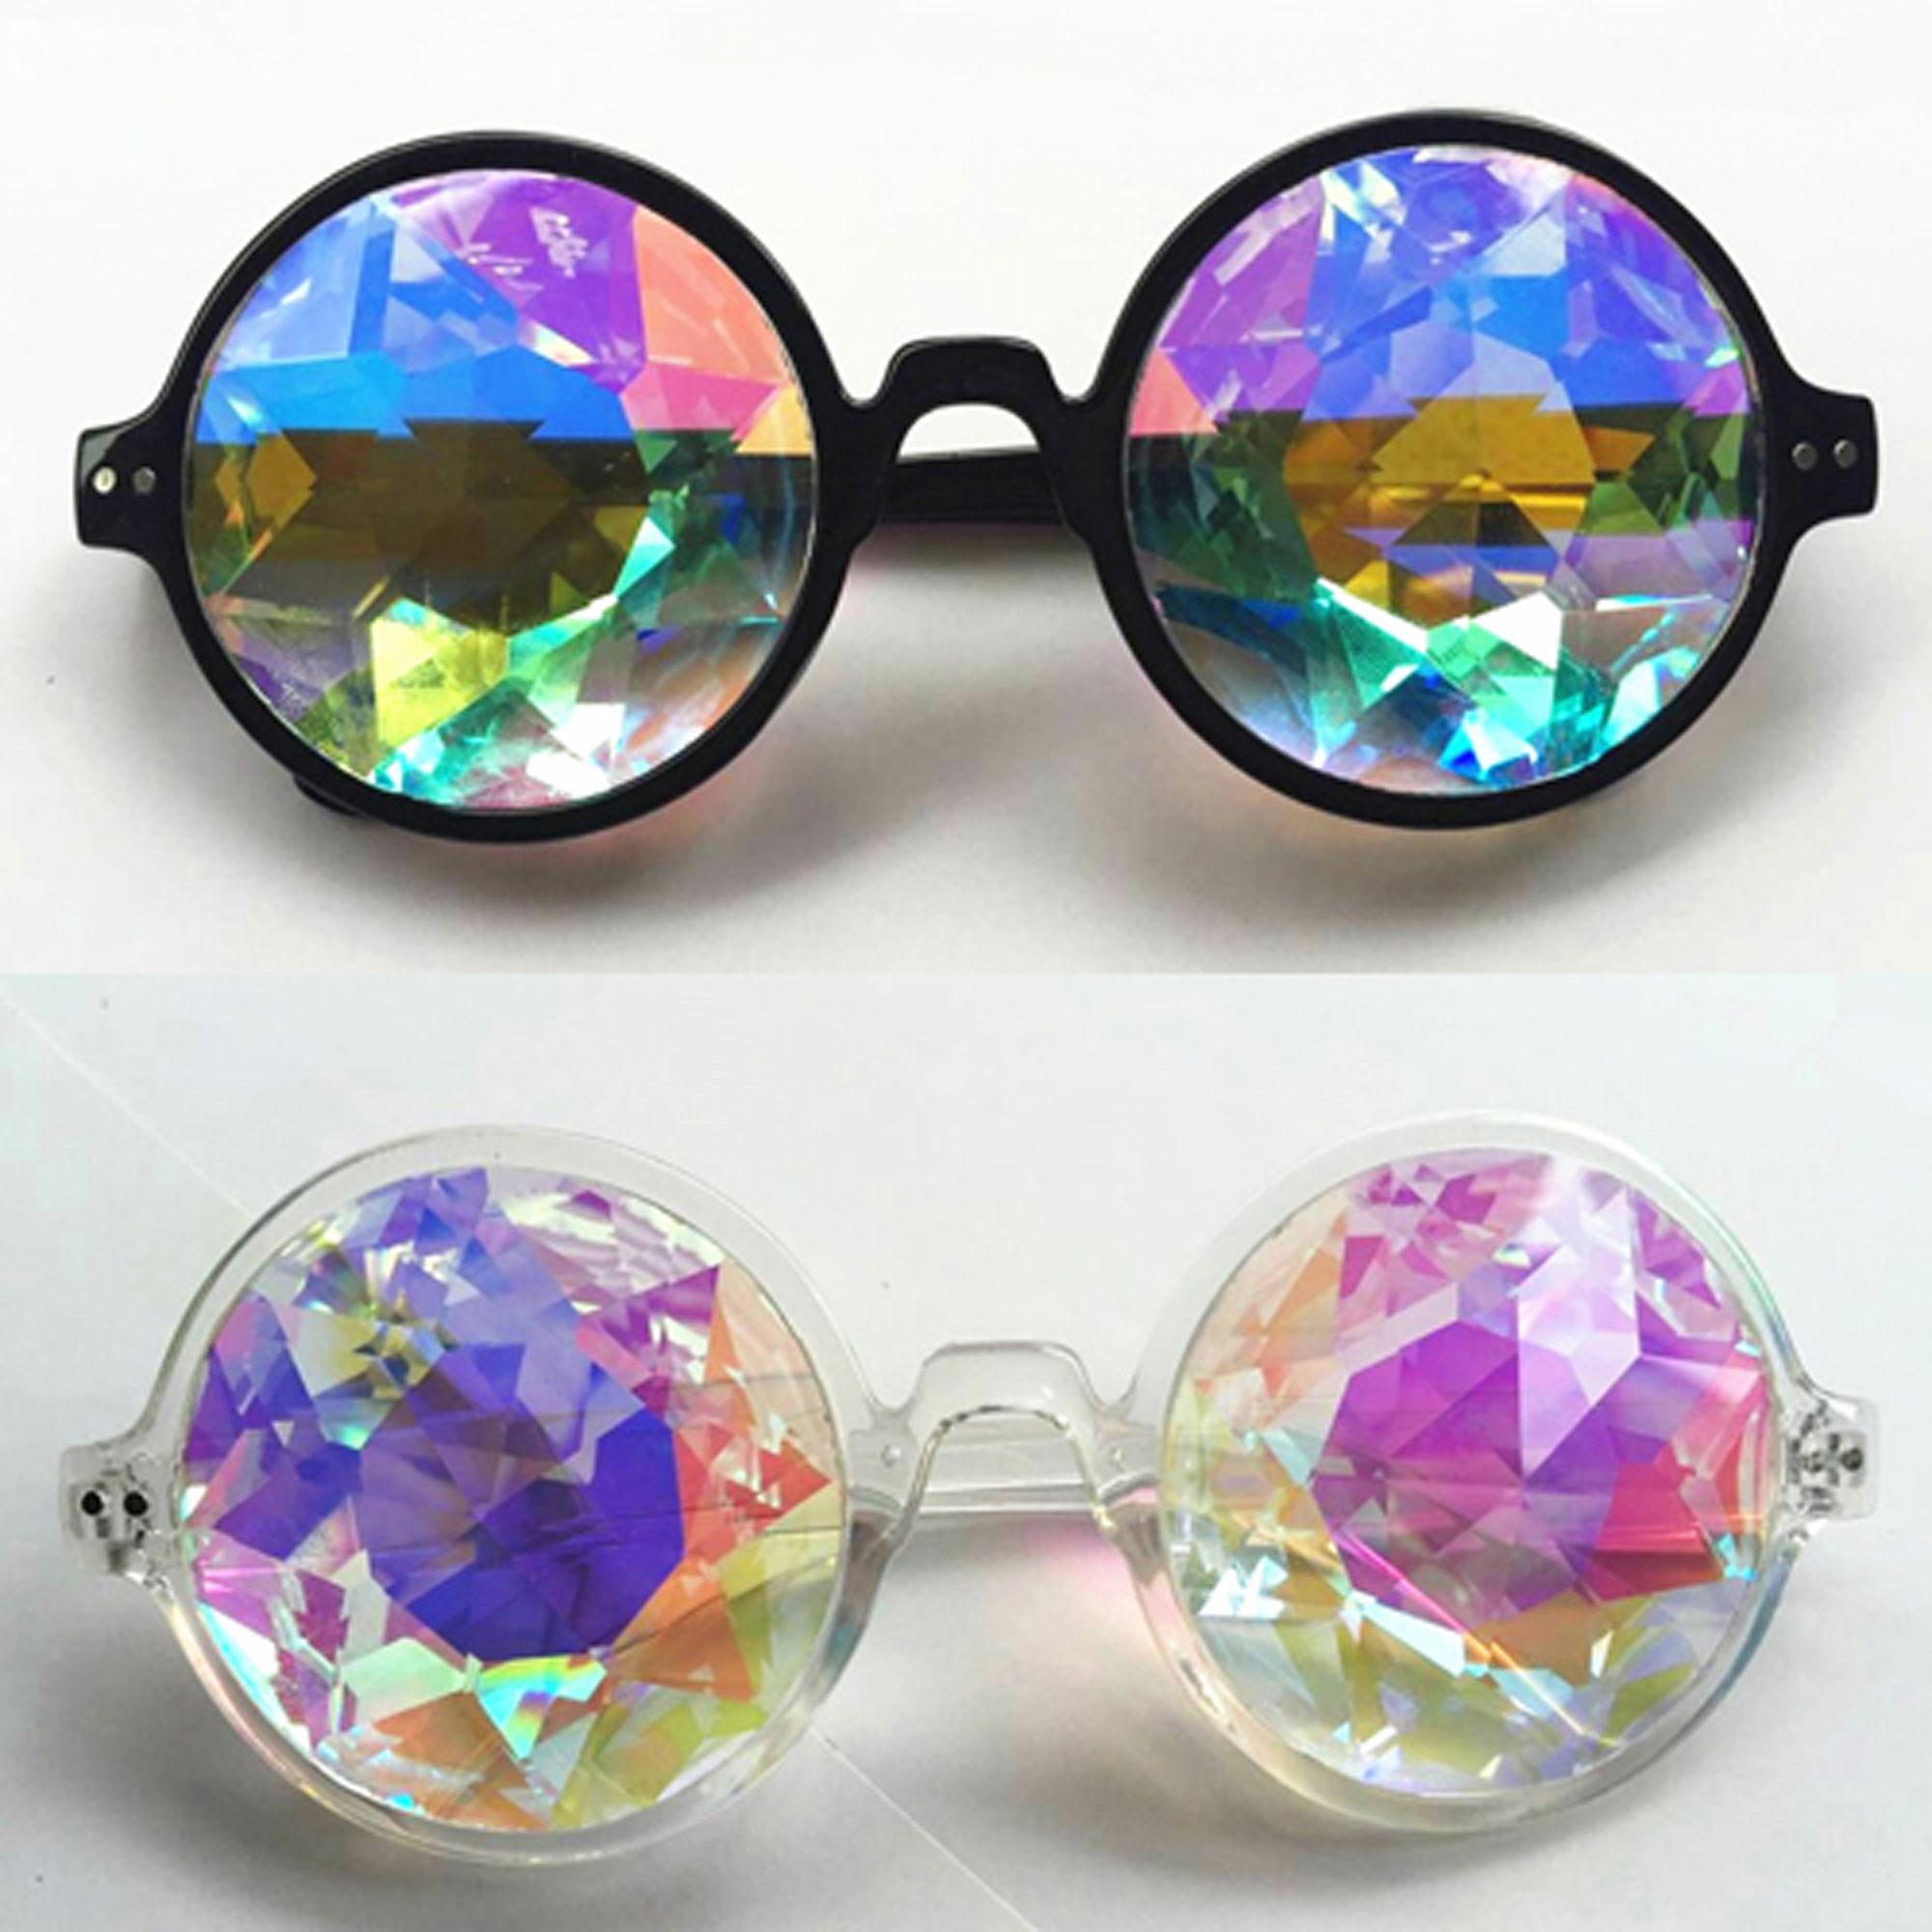 SAYFUT 2Packs Goggles Rainbow Kaleidoscope Glasses Prism Sunglasses Festival Diffraction Goggles Cosplay Black Pink Clear - image 2 of 5